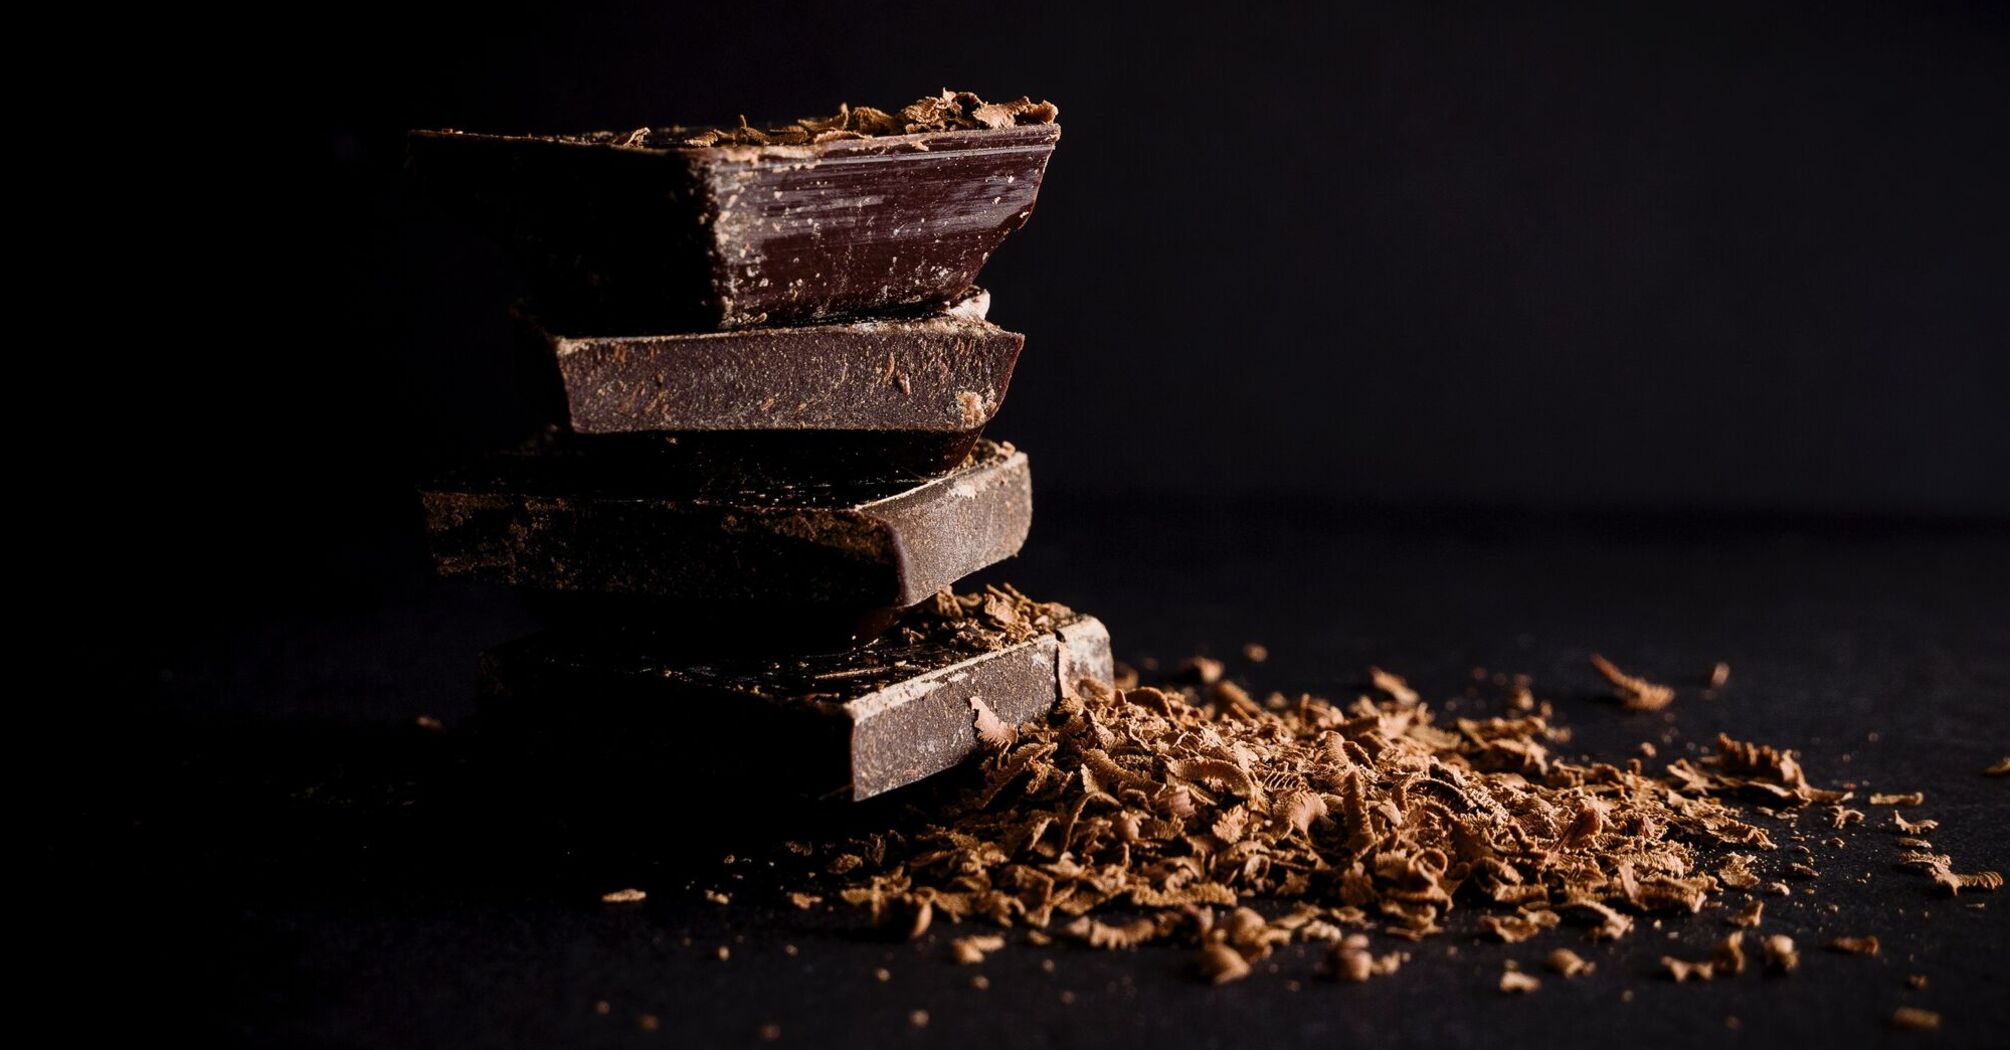 Luxury chocolate bars with cocoa beans